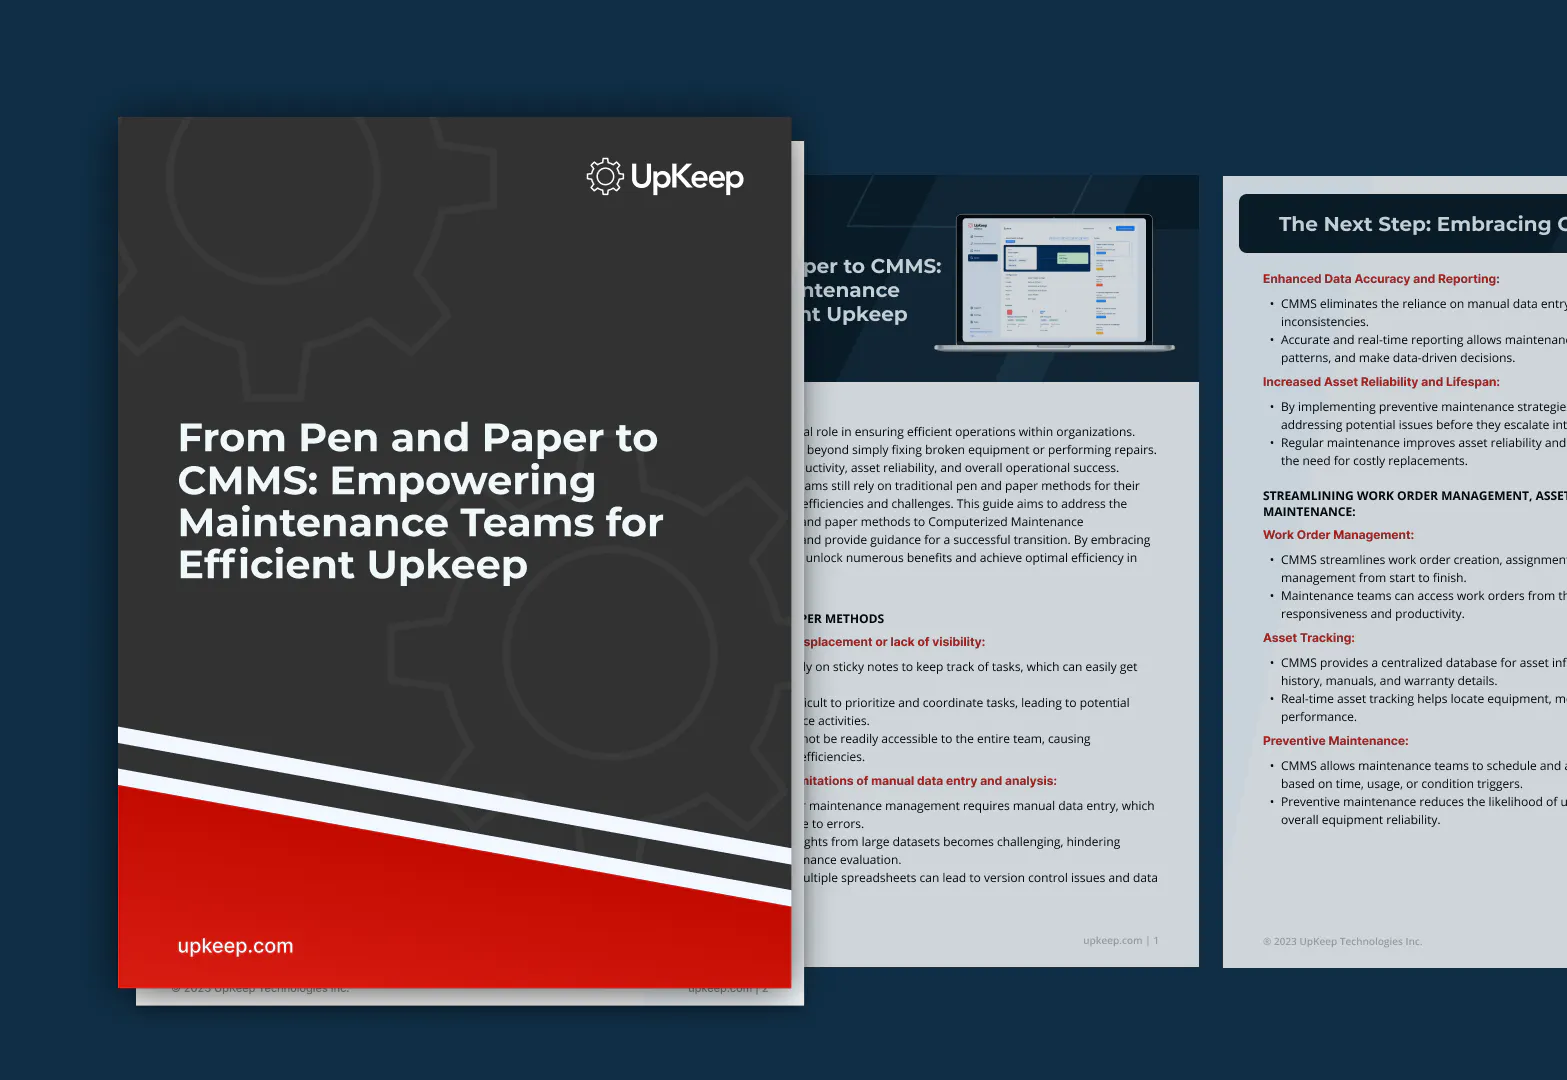  From Pen and Paper to CMMS: Empowering Maintenance Teams for Efficient Upkeep